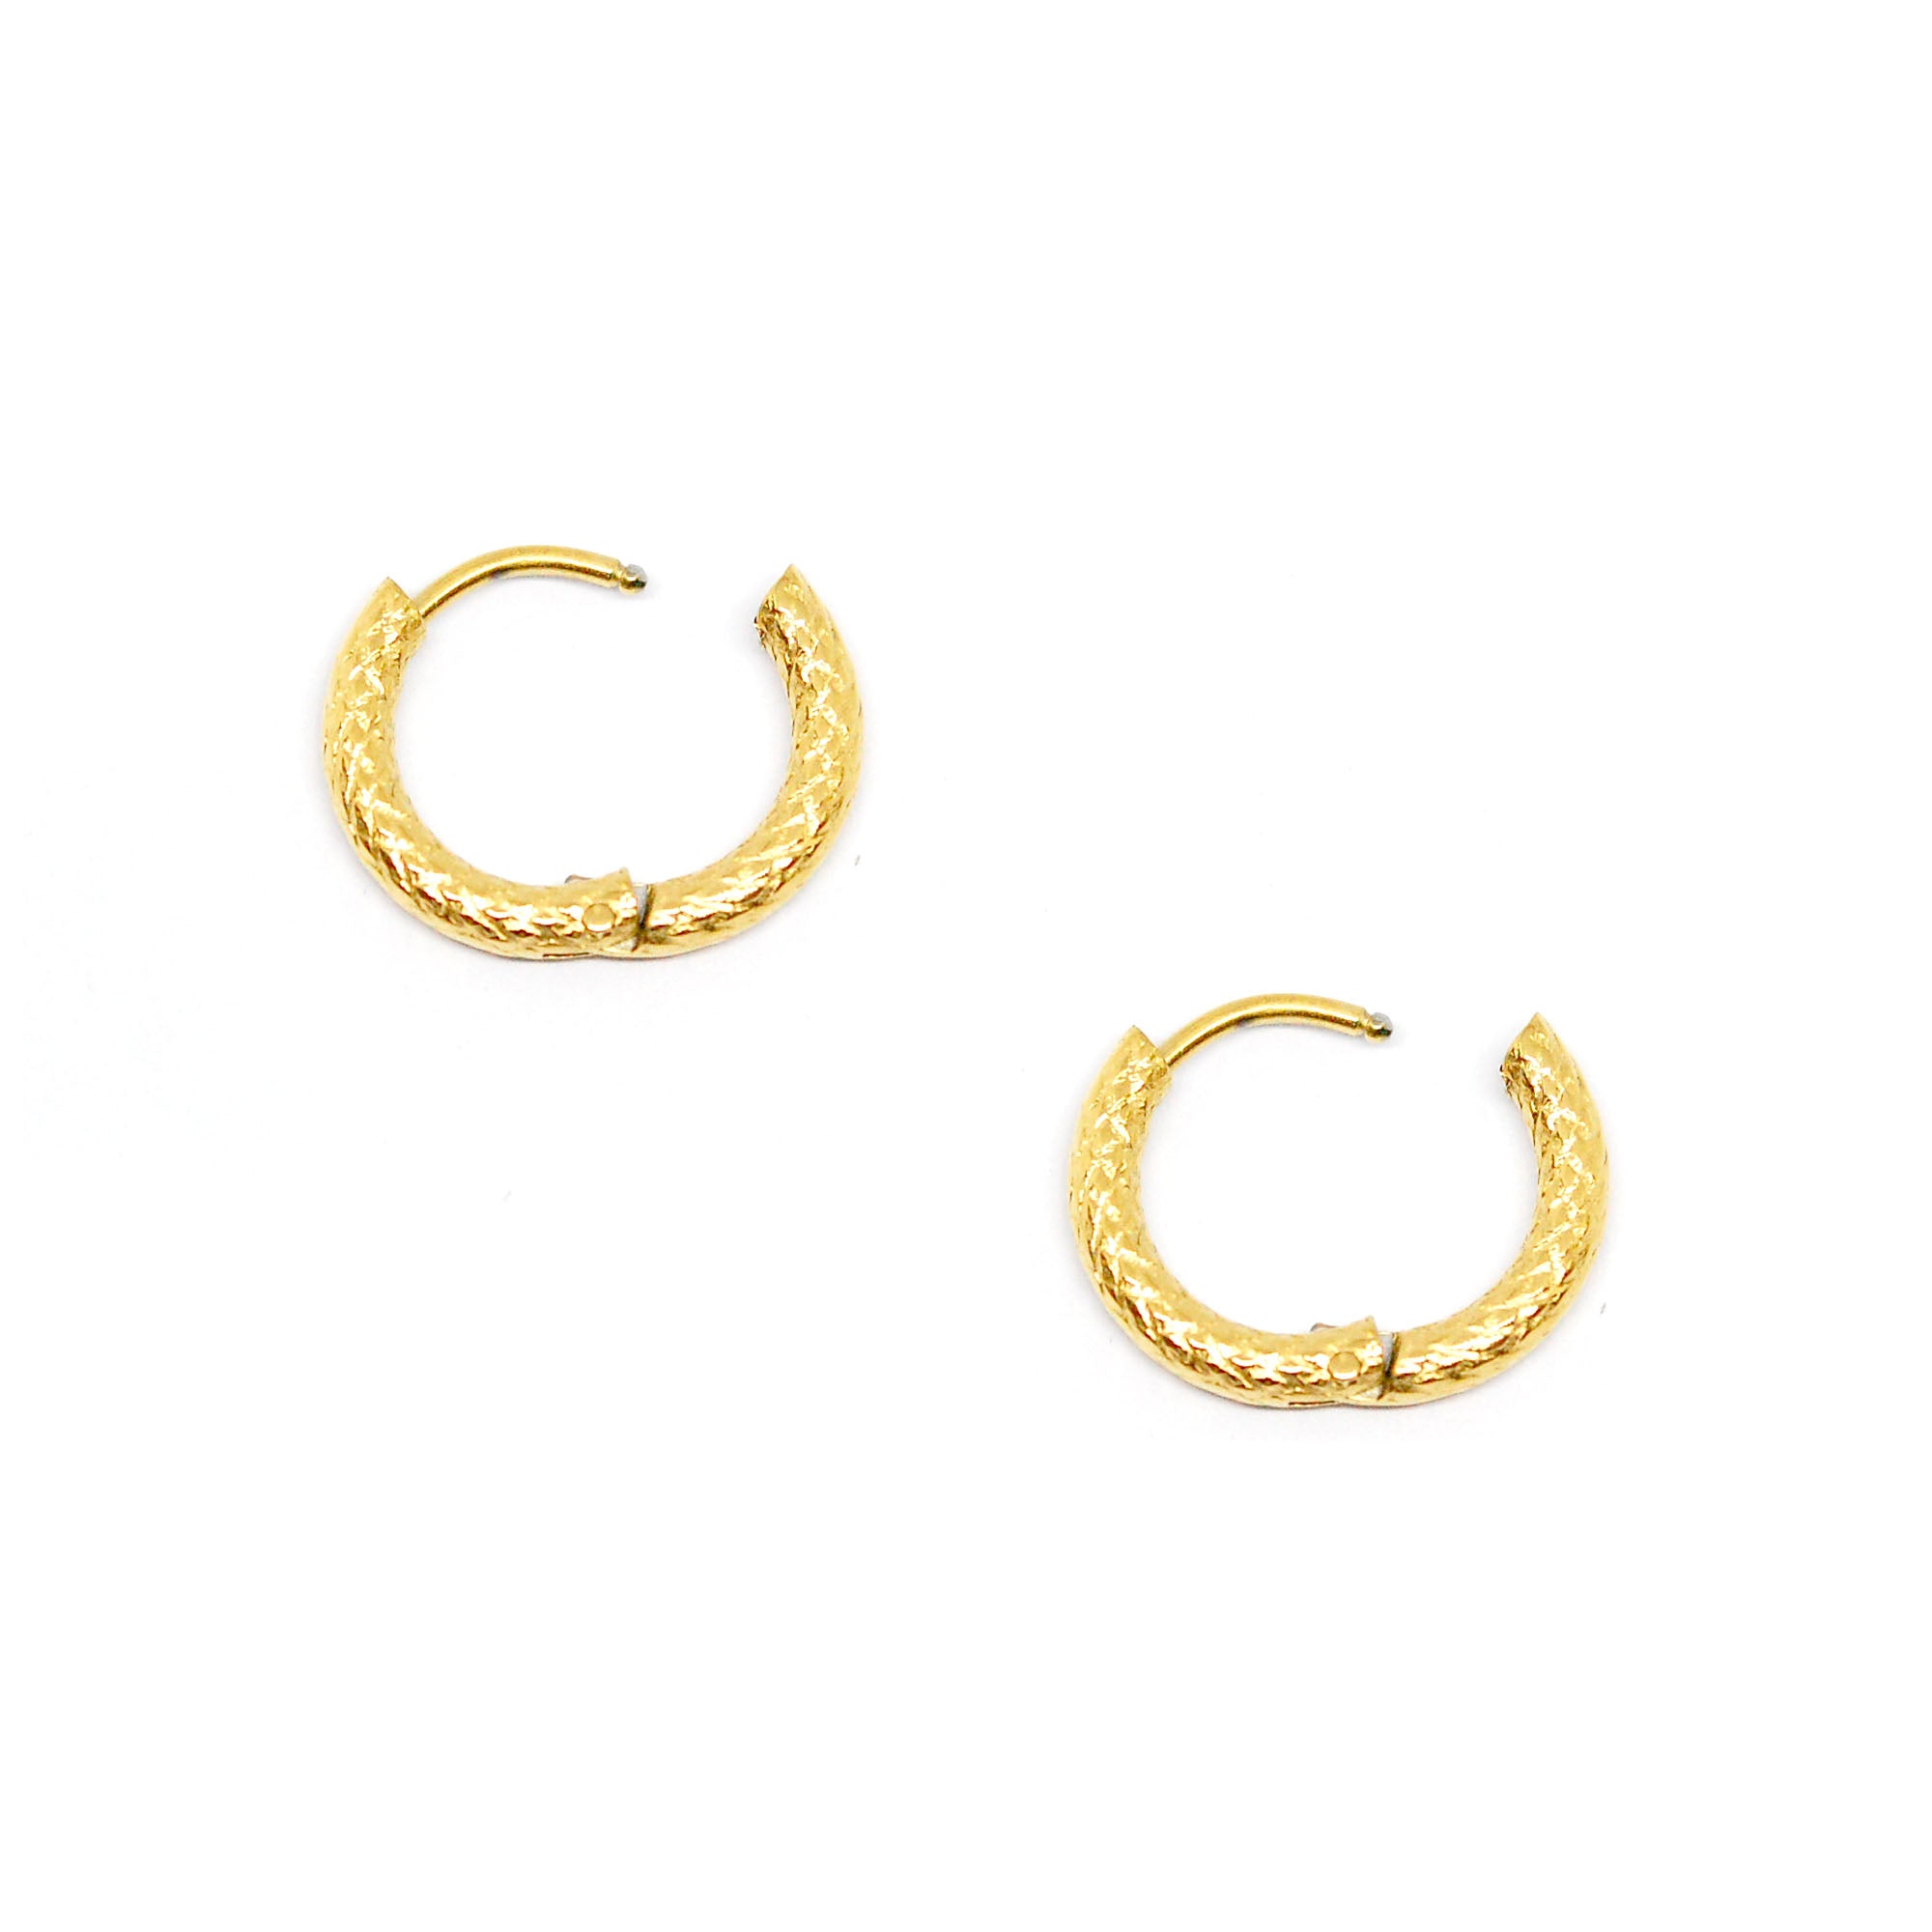 ESE 7997: All IPG 15mm Delicately Etched Hoops